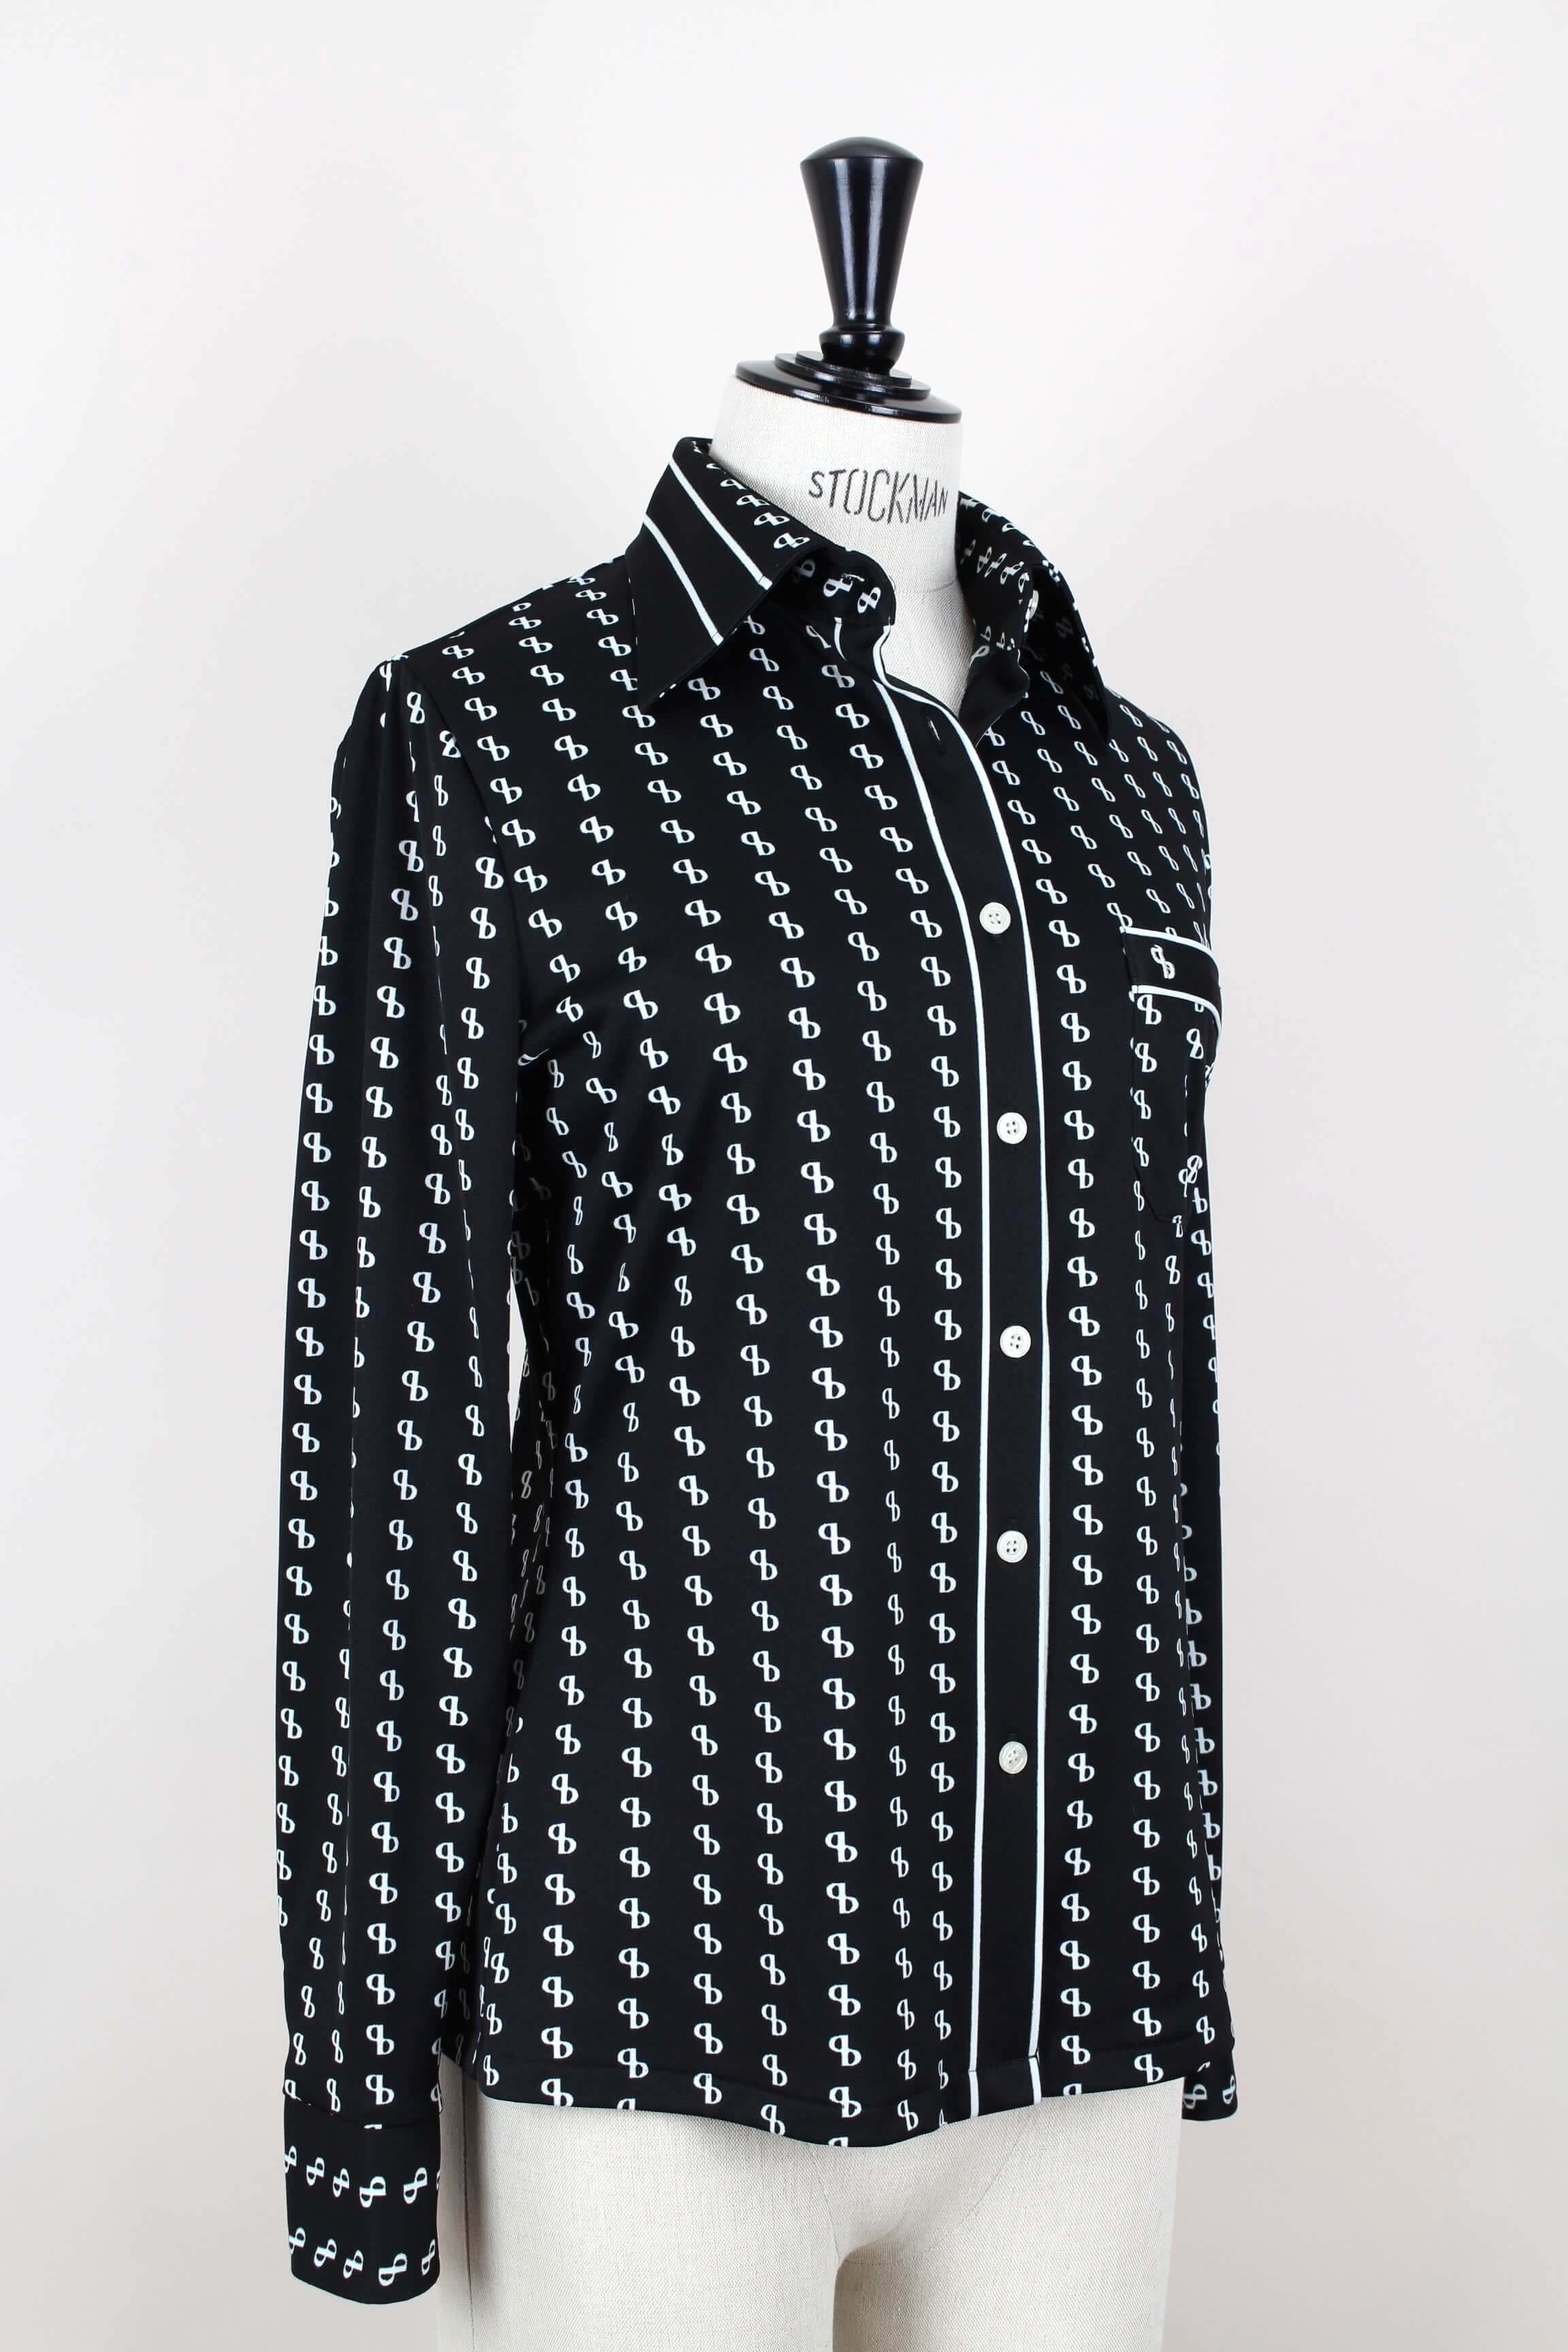 Smart 1970’s Silver Piano black jersey blouse with an eye-catching white monogram print. The design features a slightly fitted silhouette, a pointed collar, long buttoned sleeves, a chest patch pocket and a front button closure. Love the sleek